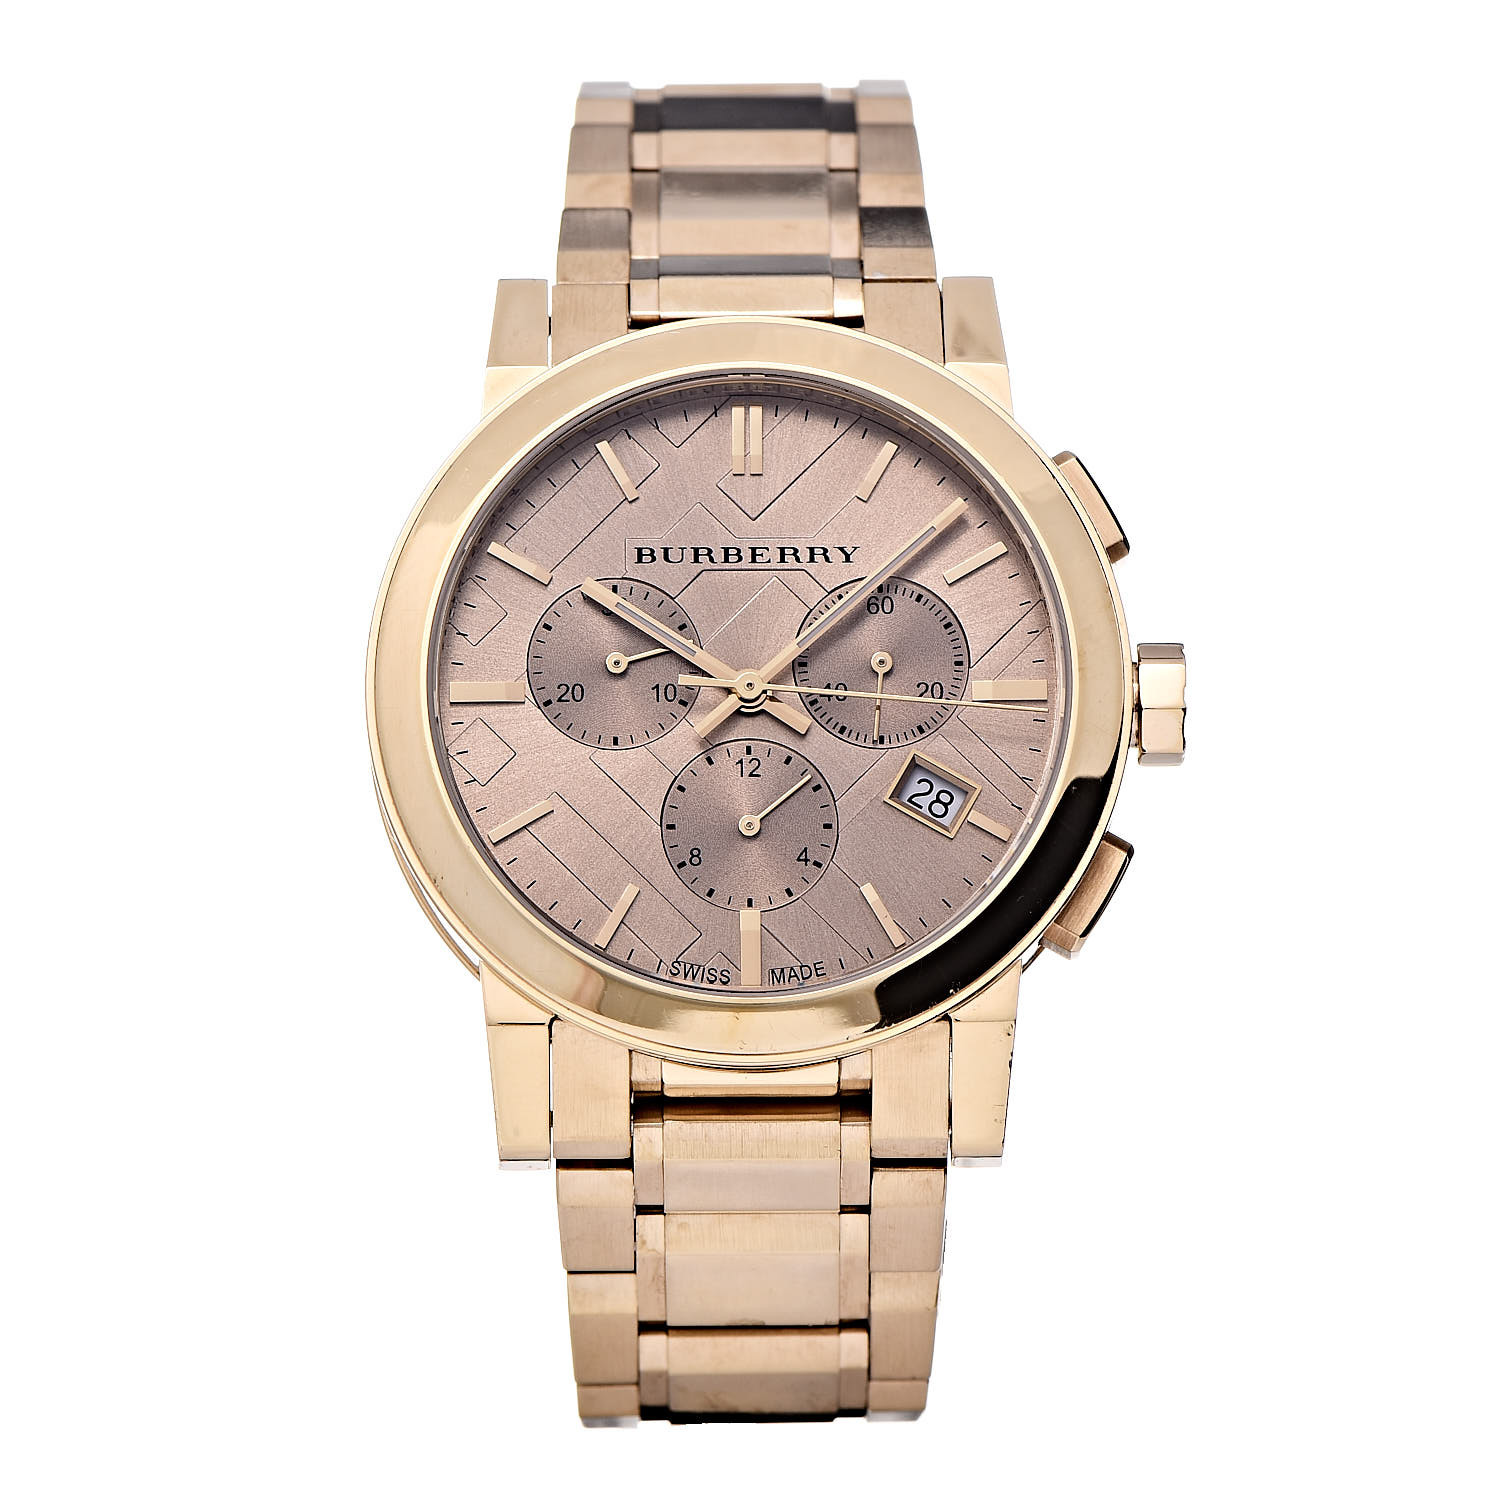 BURBERRY Stainless Steel 38mm Check Stamped Chronograph Quartz Watch